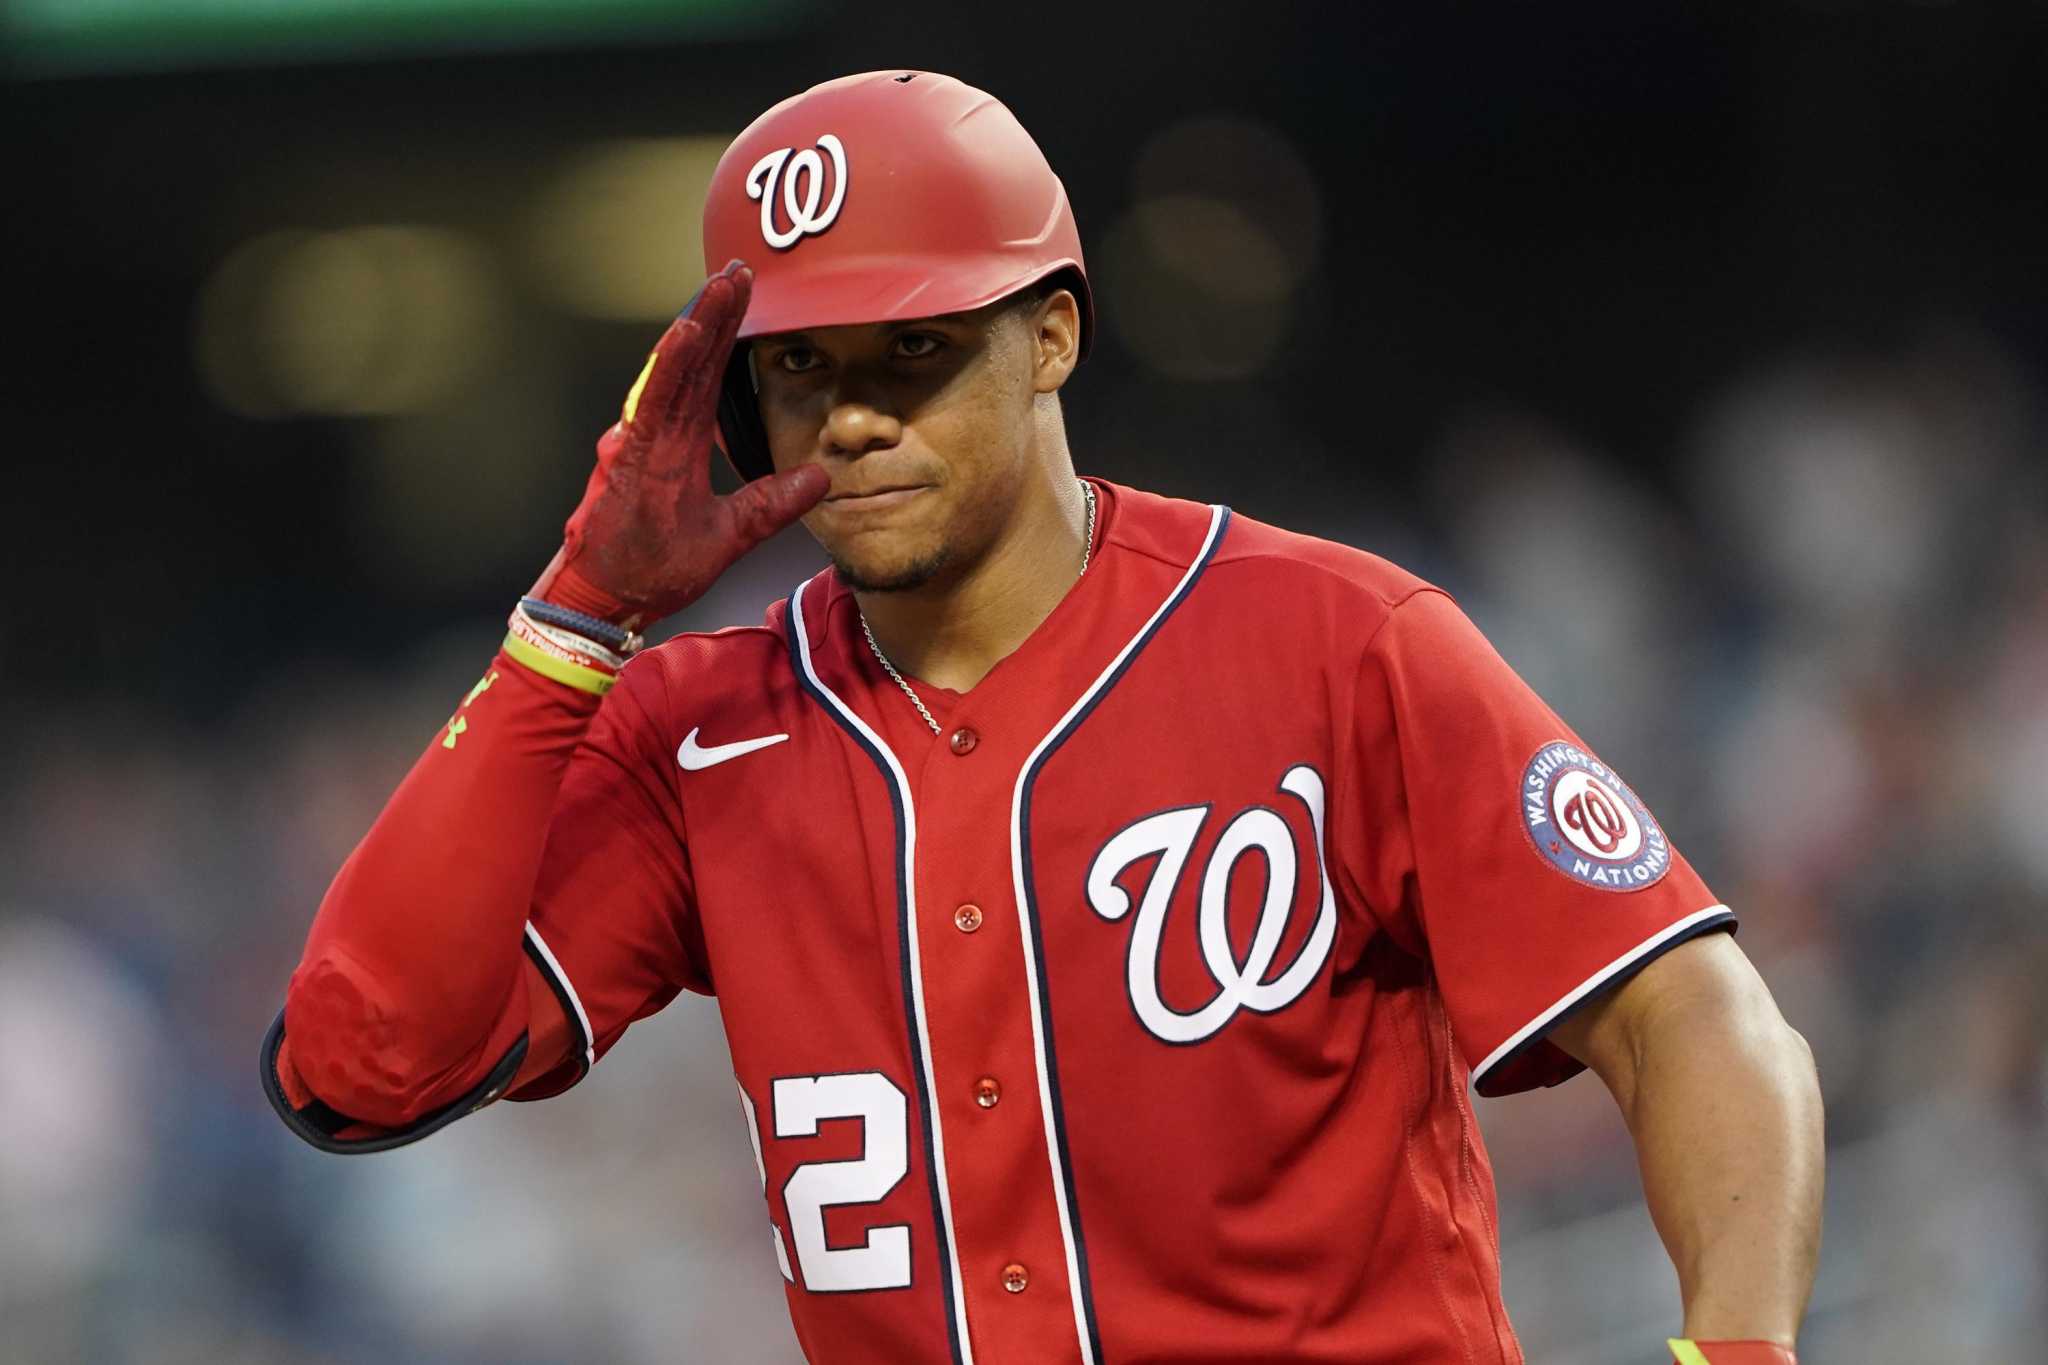 Report: Nationals star Soto turns down $440 million contract